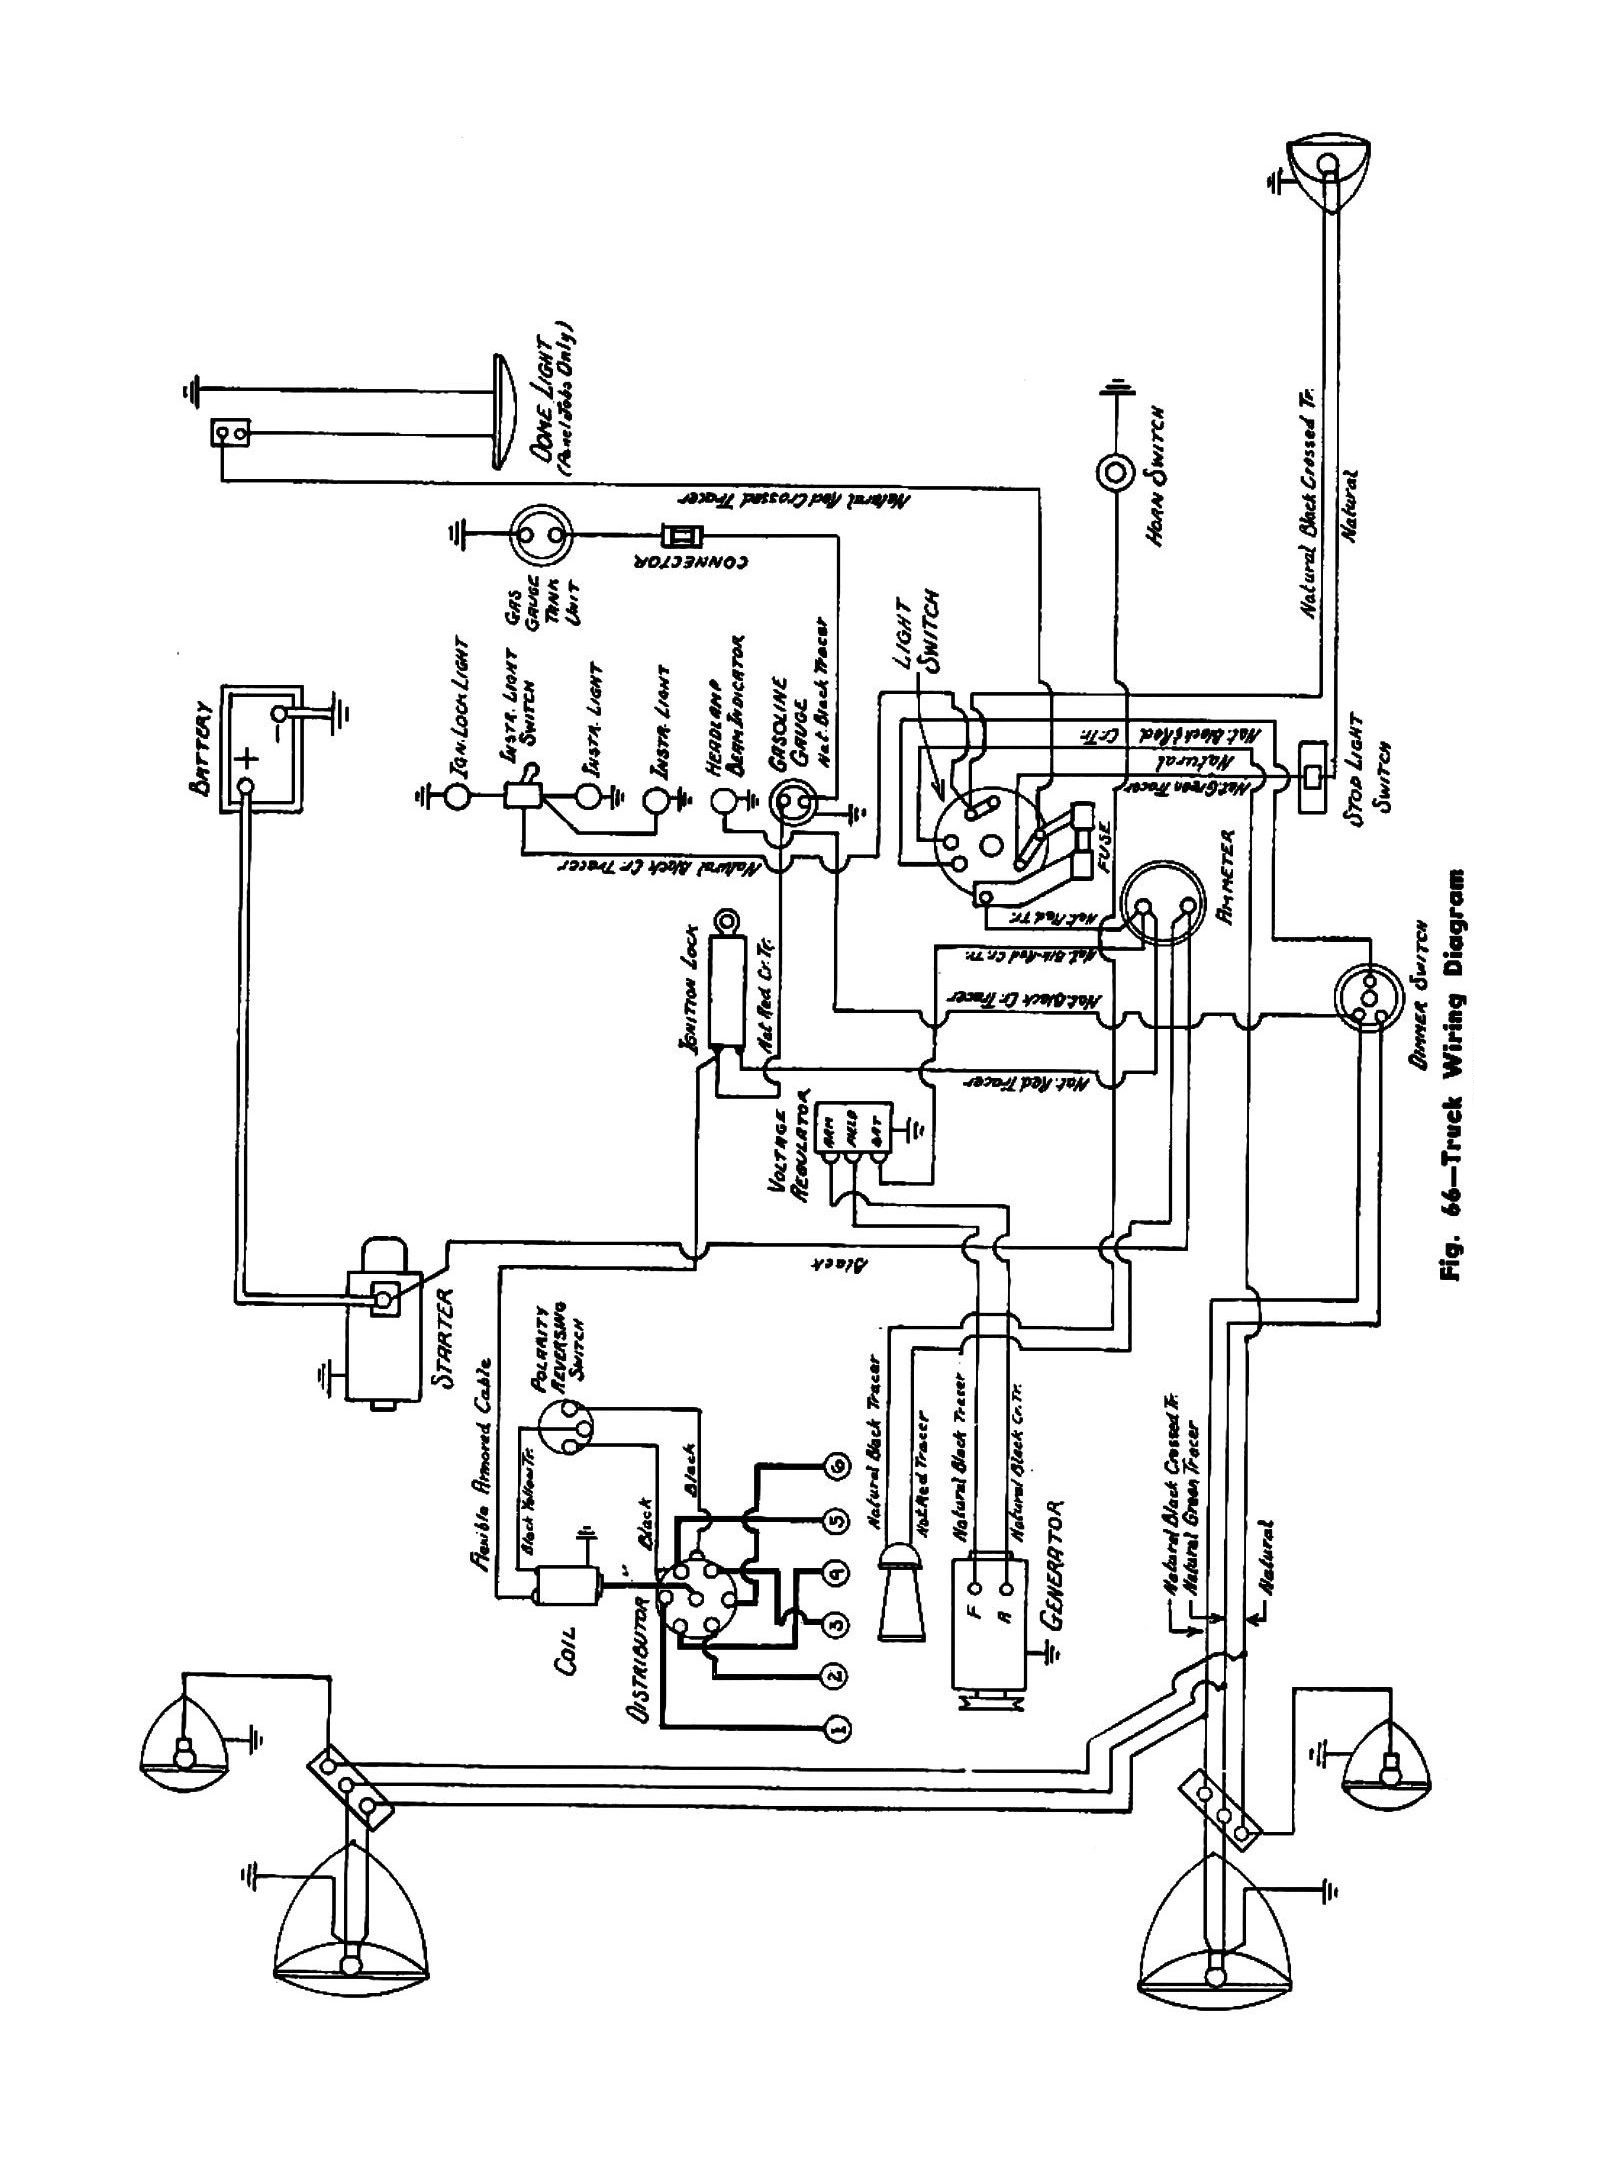 1996 Gmc Sierra 1500 Wiring Diagram from chevy.oldcarmanualproject.com